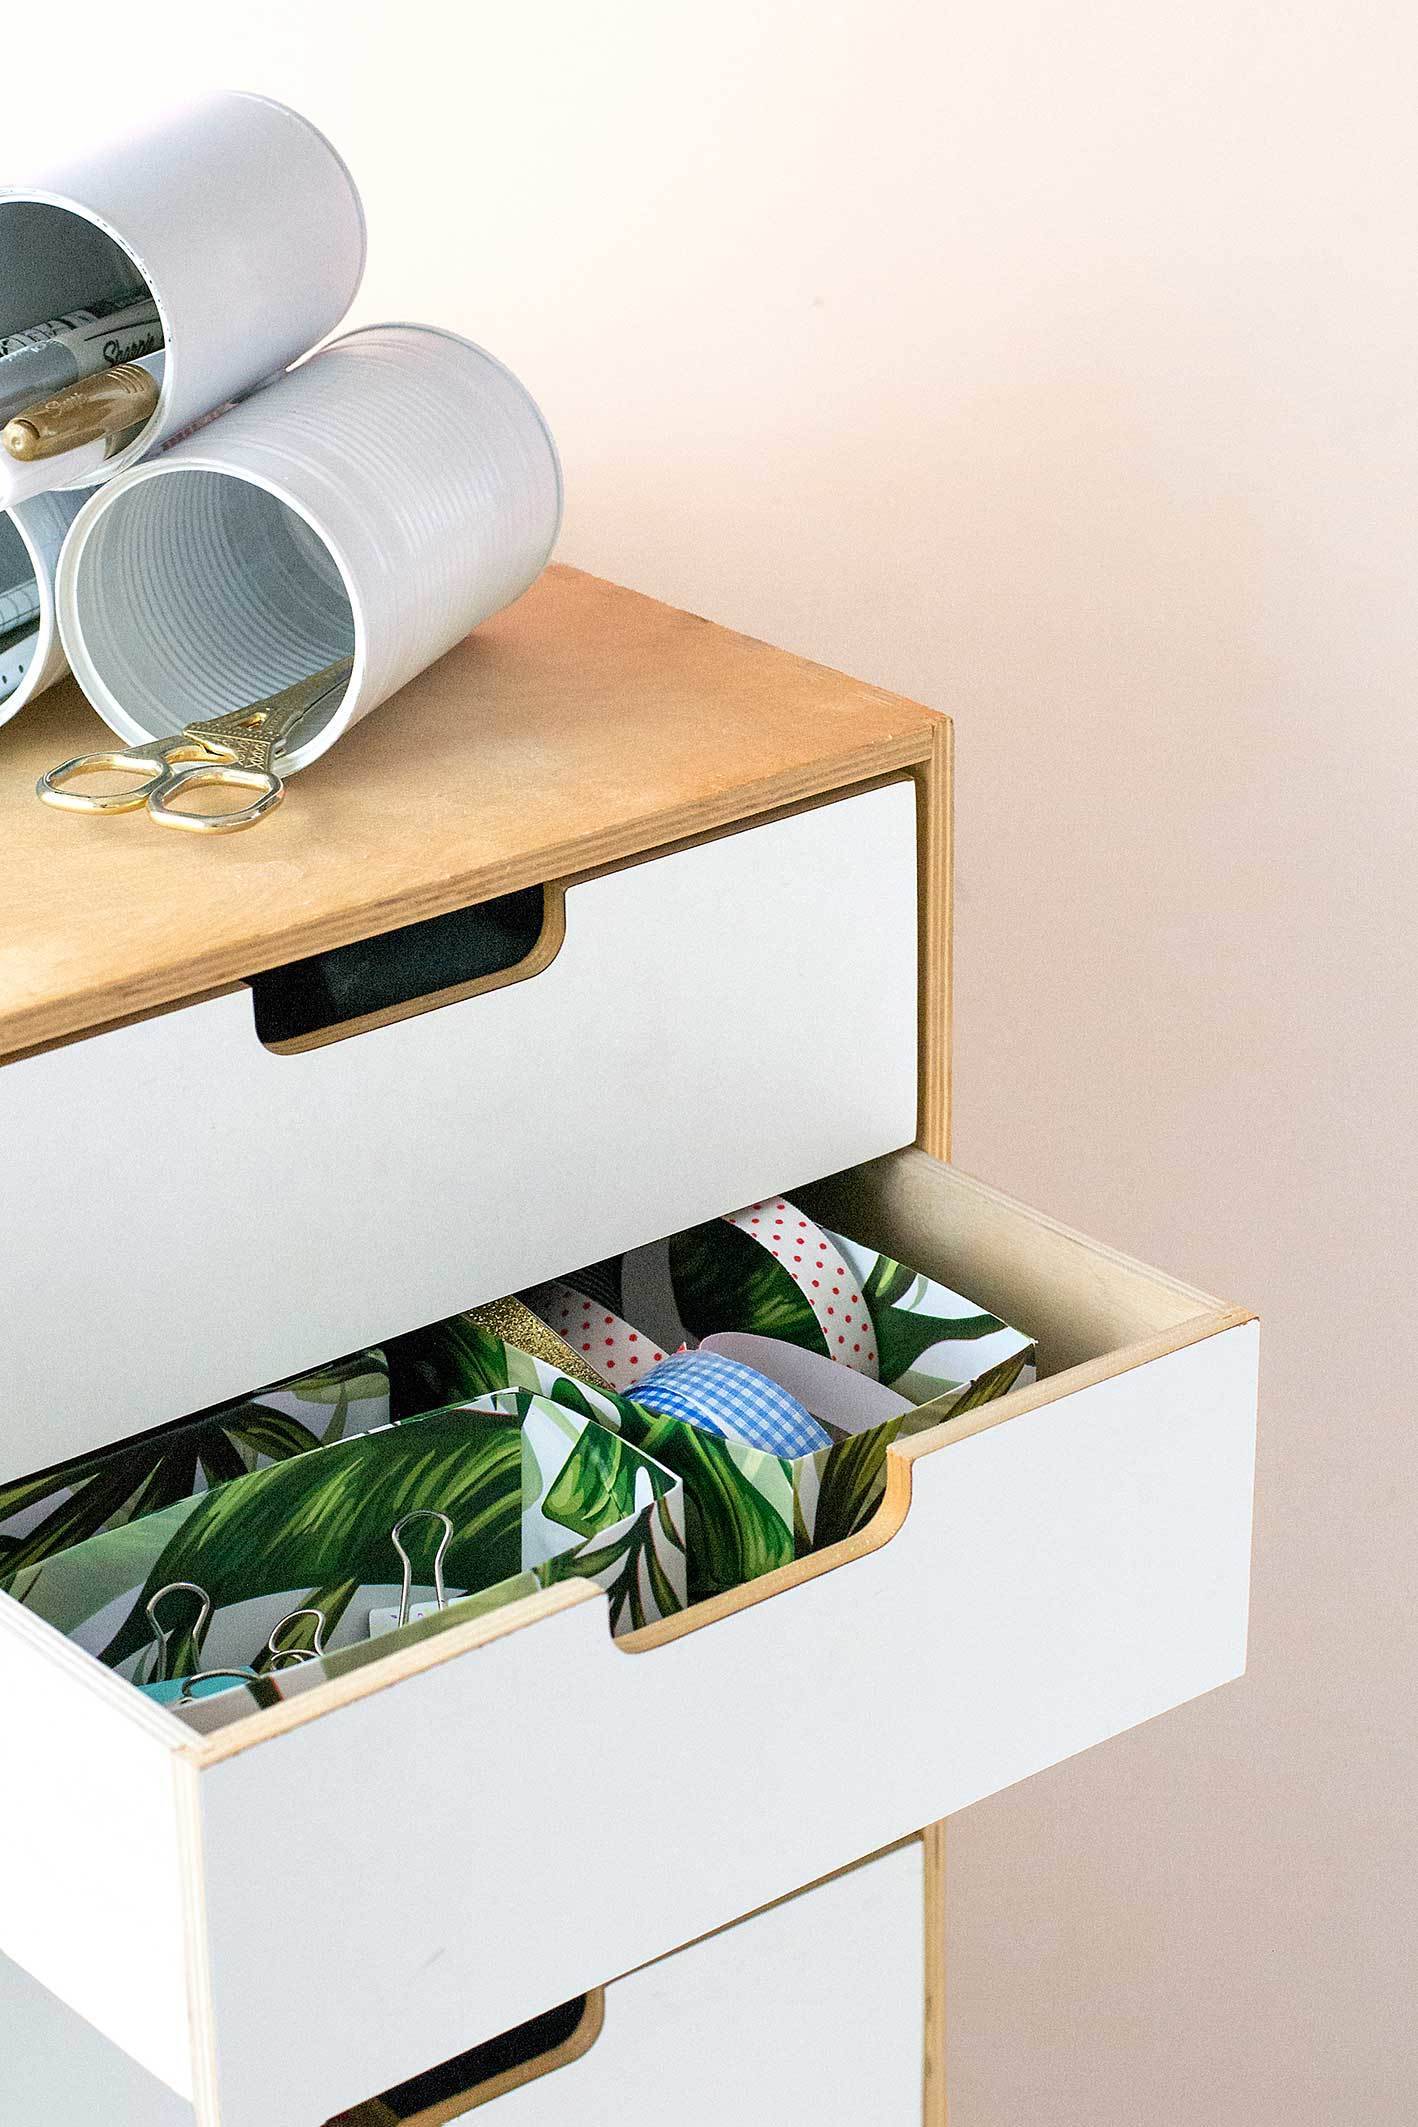 DIY hacks to curb office clutter